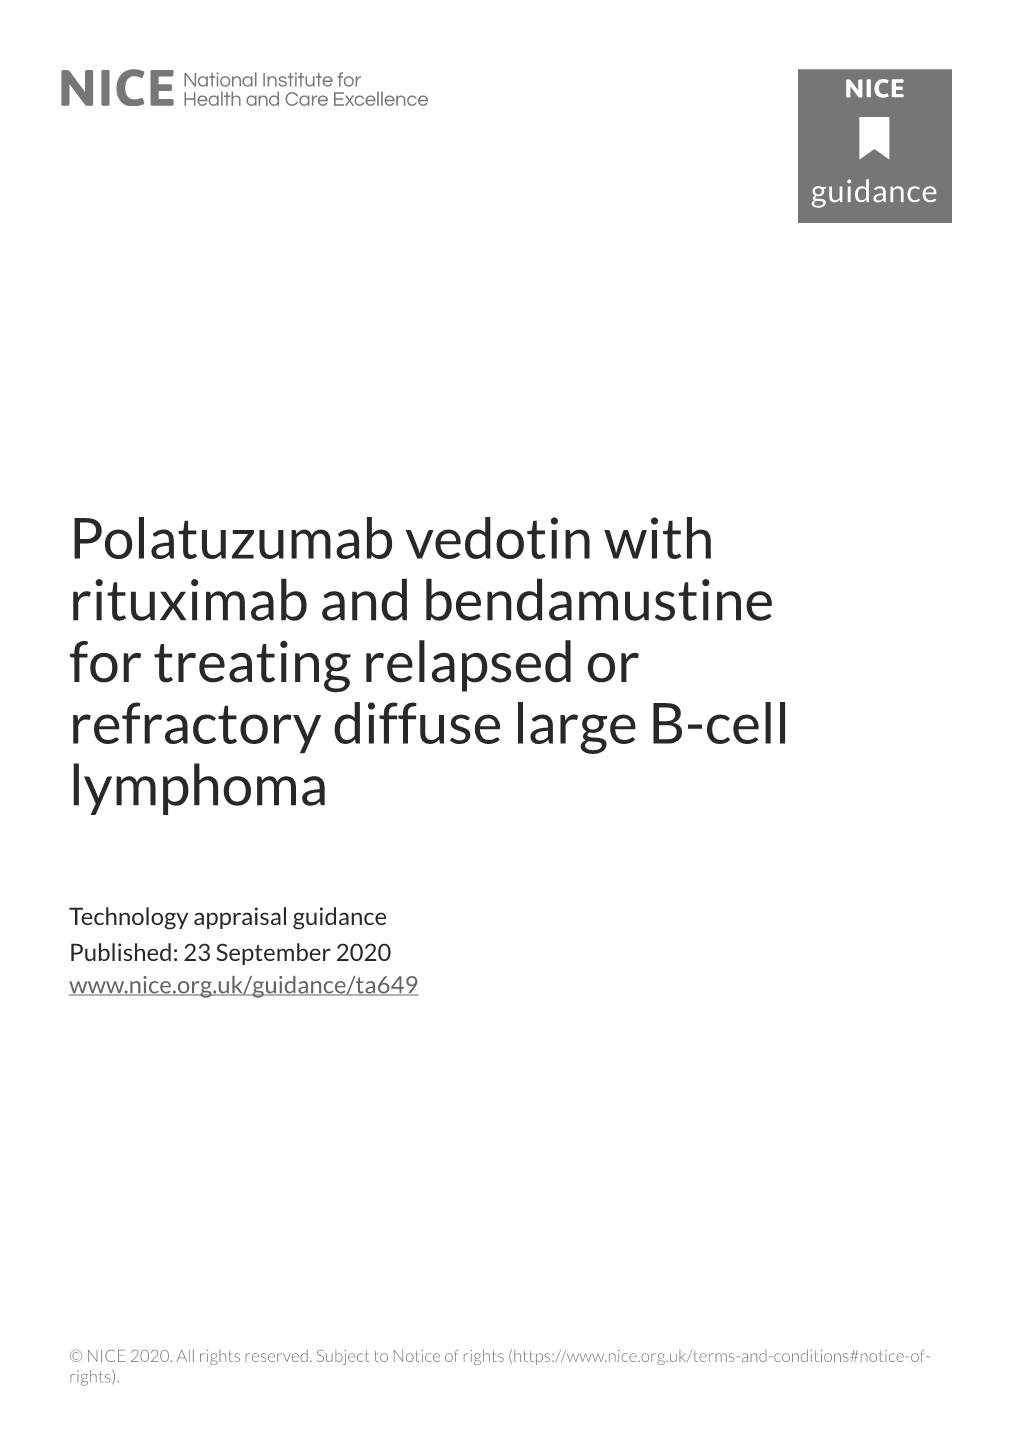 Polatuzumab Vedotin with Rituximab and Bendamustine for Treating Relapsed Or Refractory Diffuse Large B-Cell Lymphoma